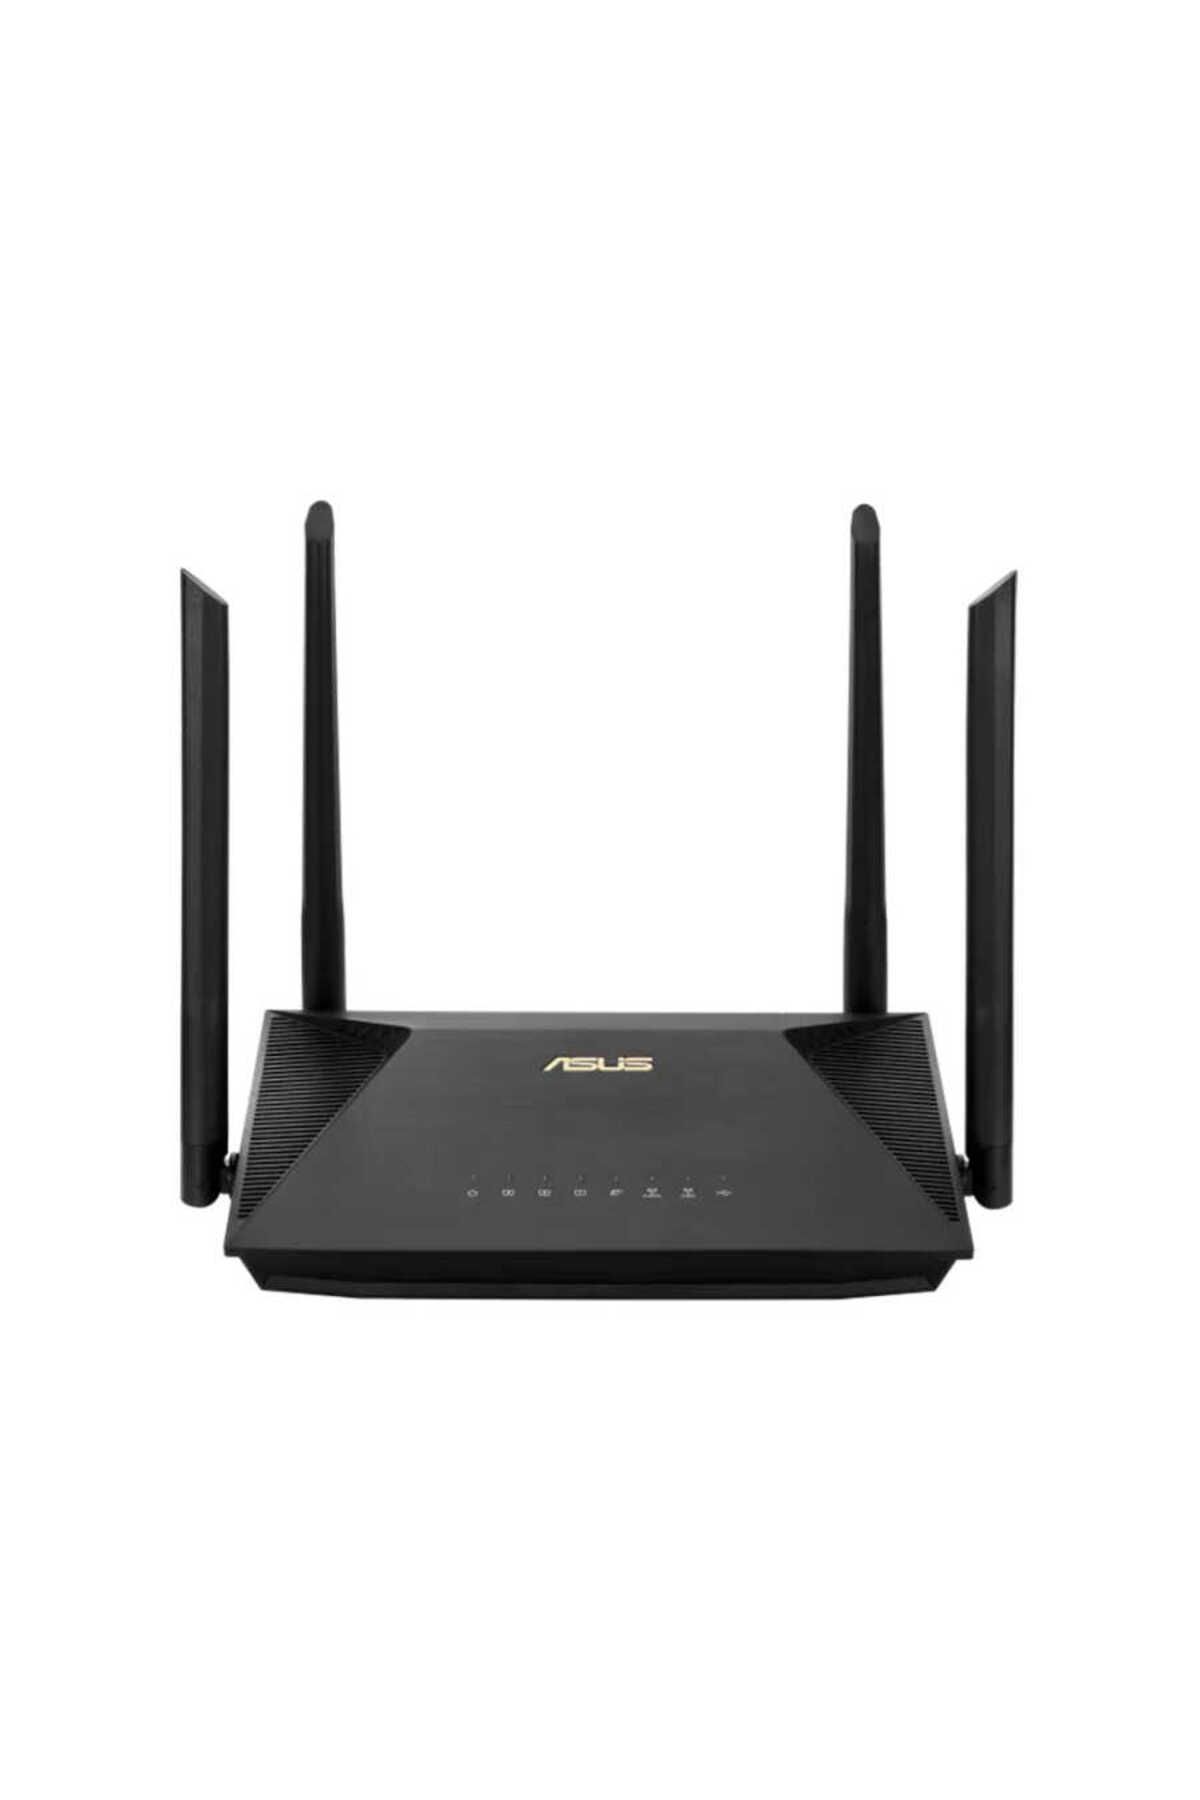 ASUS RT-AX53U Wi-Fi 3 Port Router Access Point